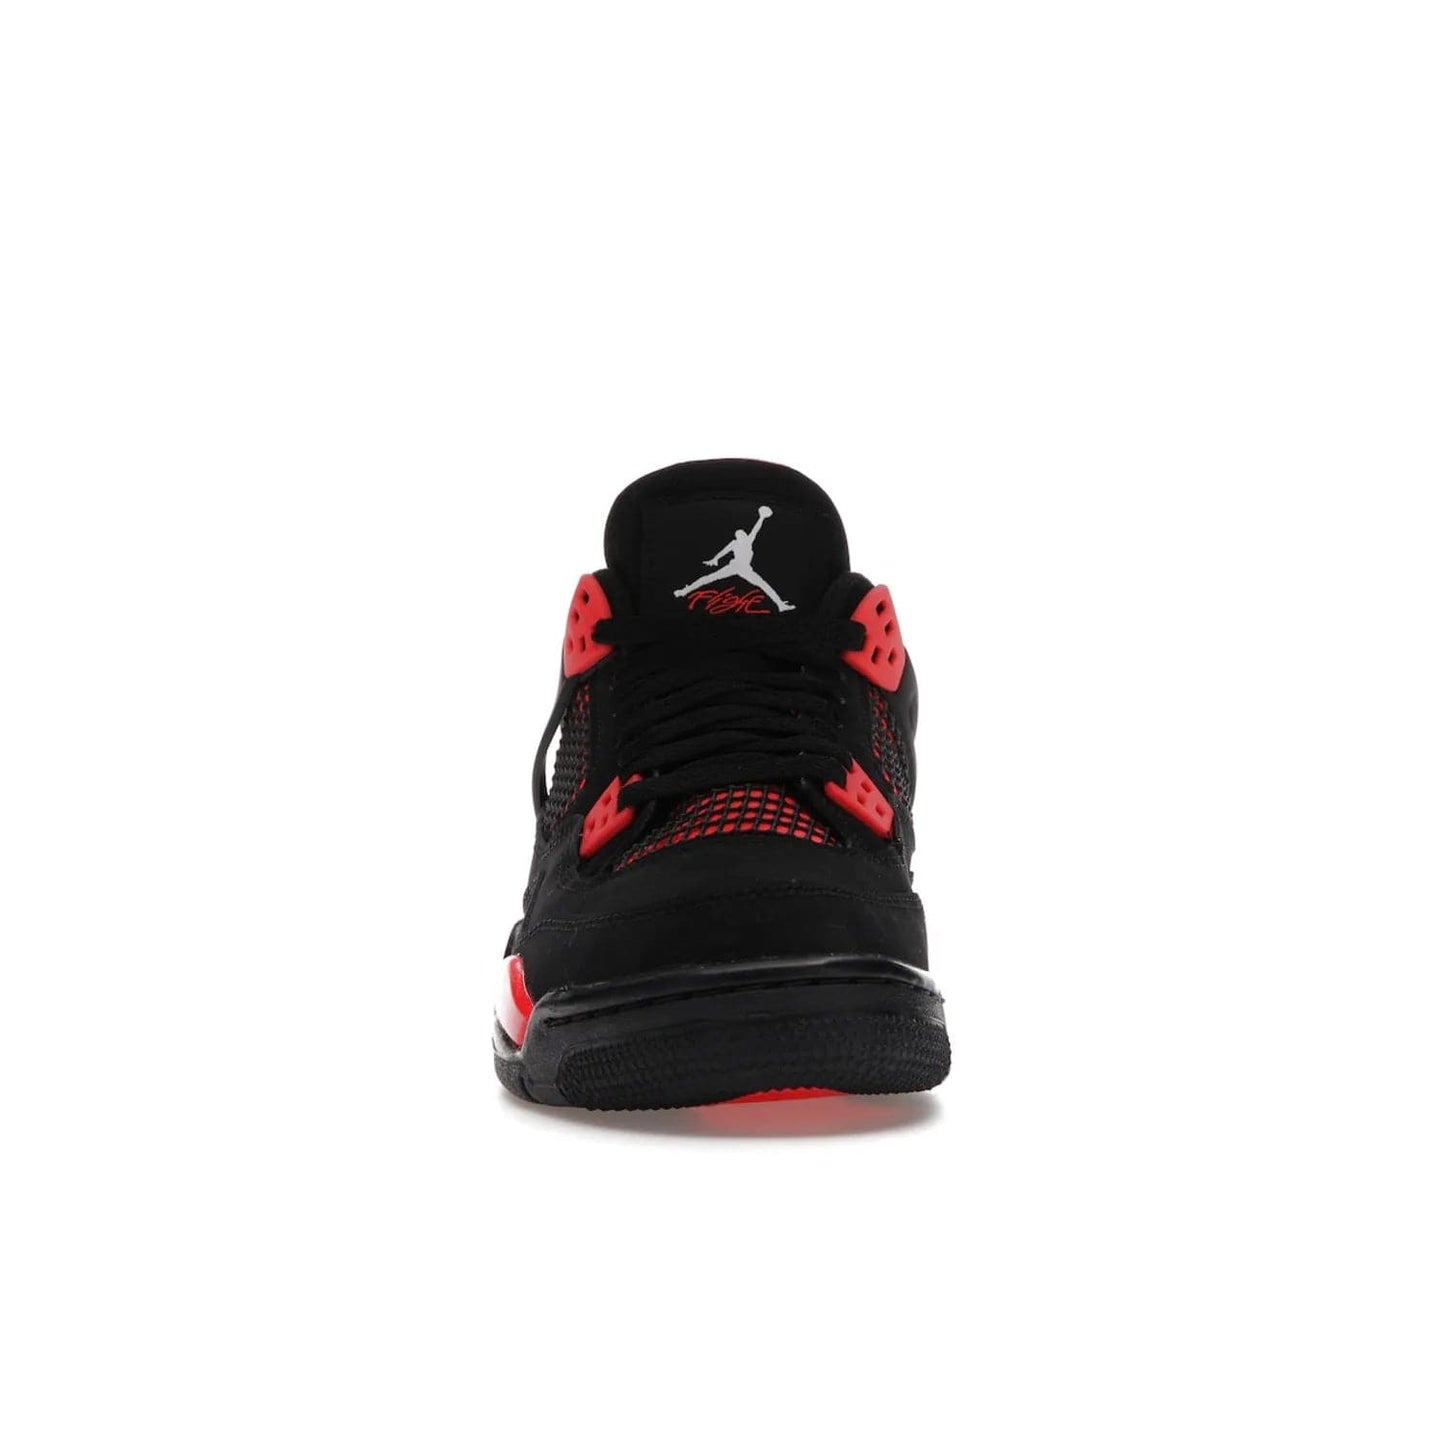 Jordan 4 Retro Red Thunder (GS) - Image 10 - Only at www.BallersClubKickz.com - The Air Jordan 4 Retro Red Thunder GS features a stylish black and crimson upper with a Jumpman logo. Athletic midsole with Air bubbles for cushioning and black rubber outsole with iconic motif complete this classic sneaker.